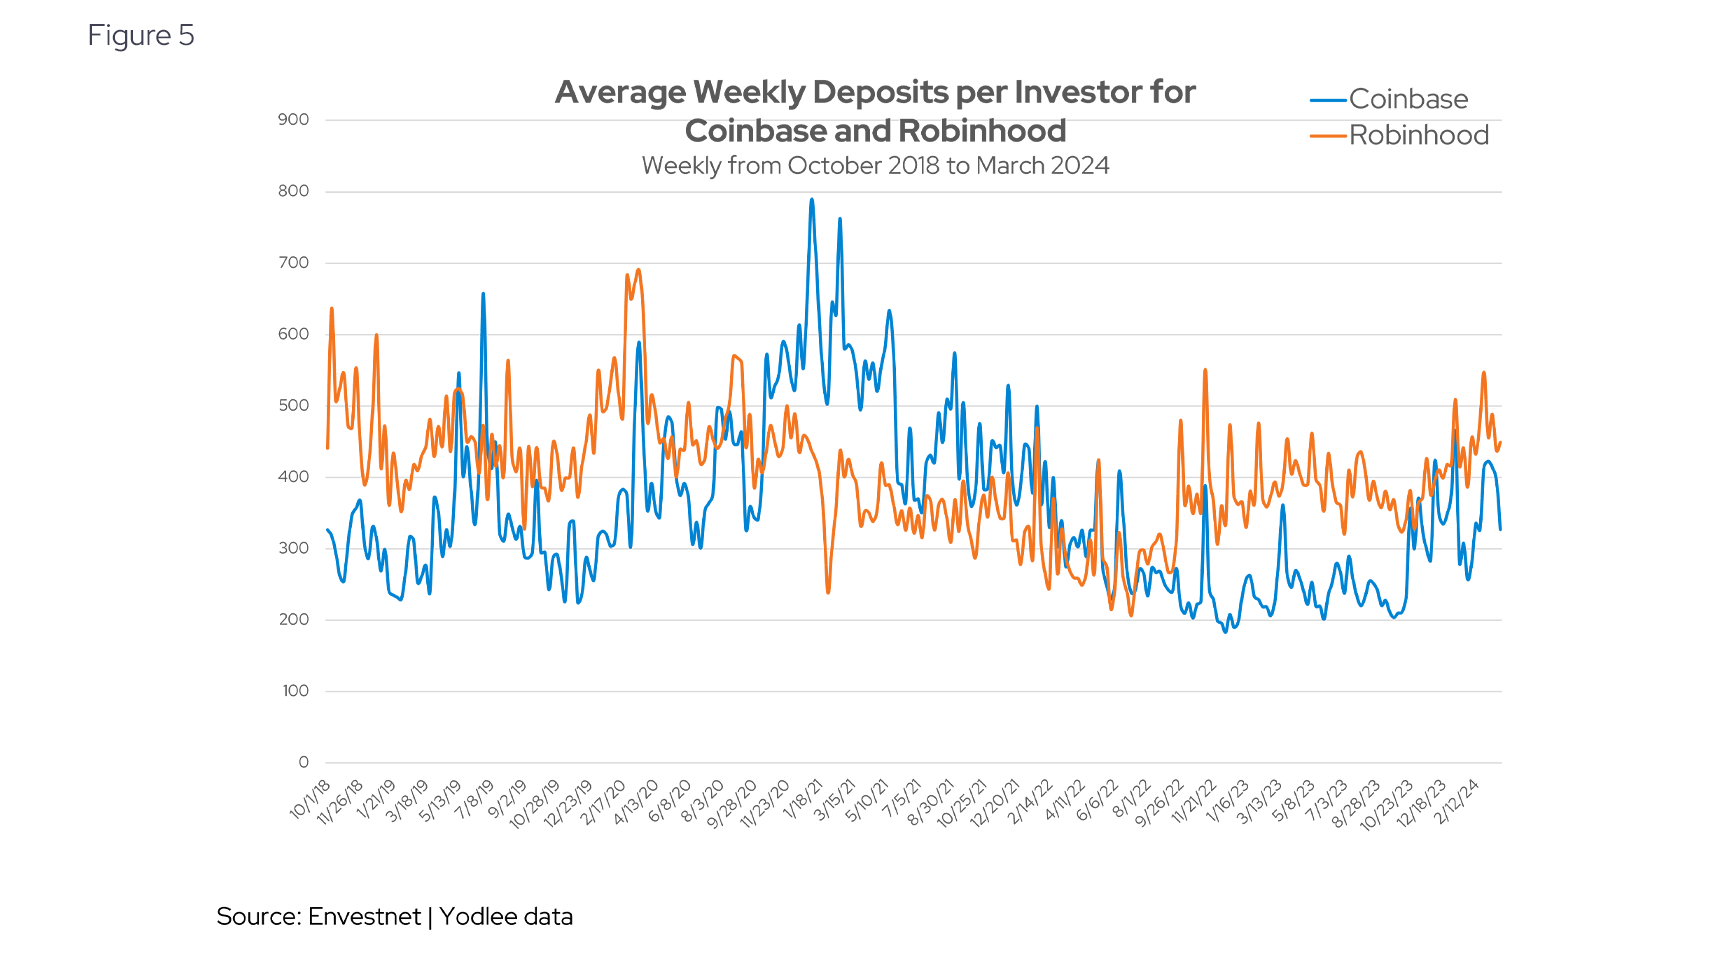 Average Weekly Deposits per Investor for Coinbase and Robinhood